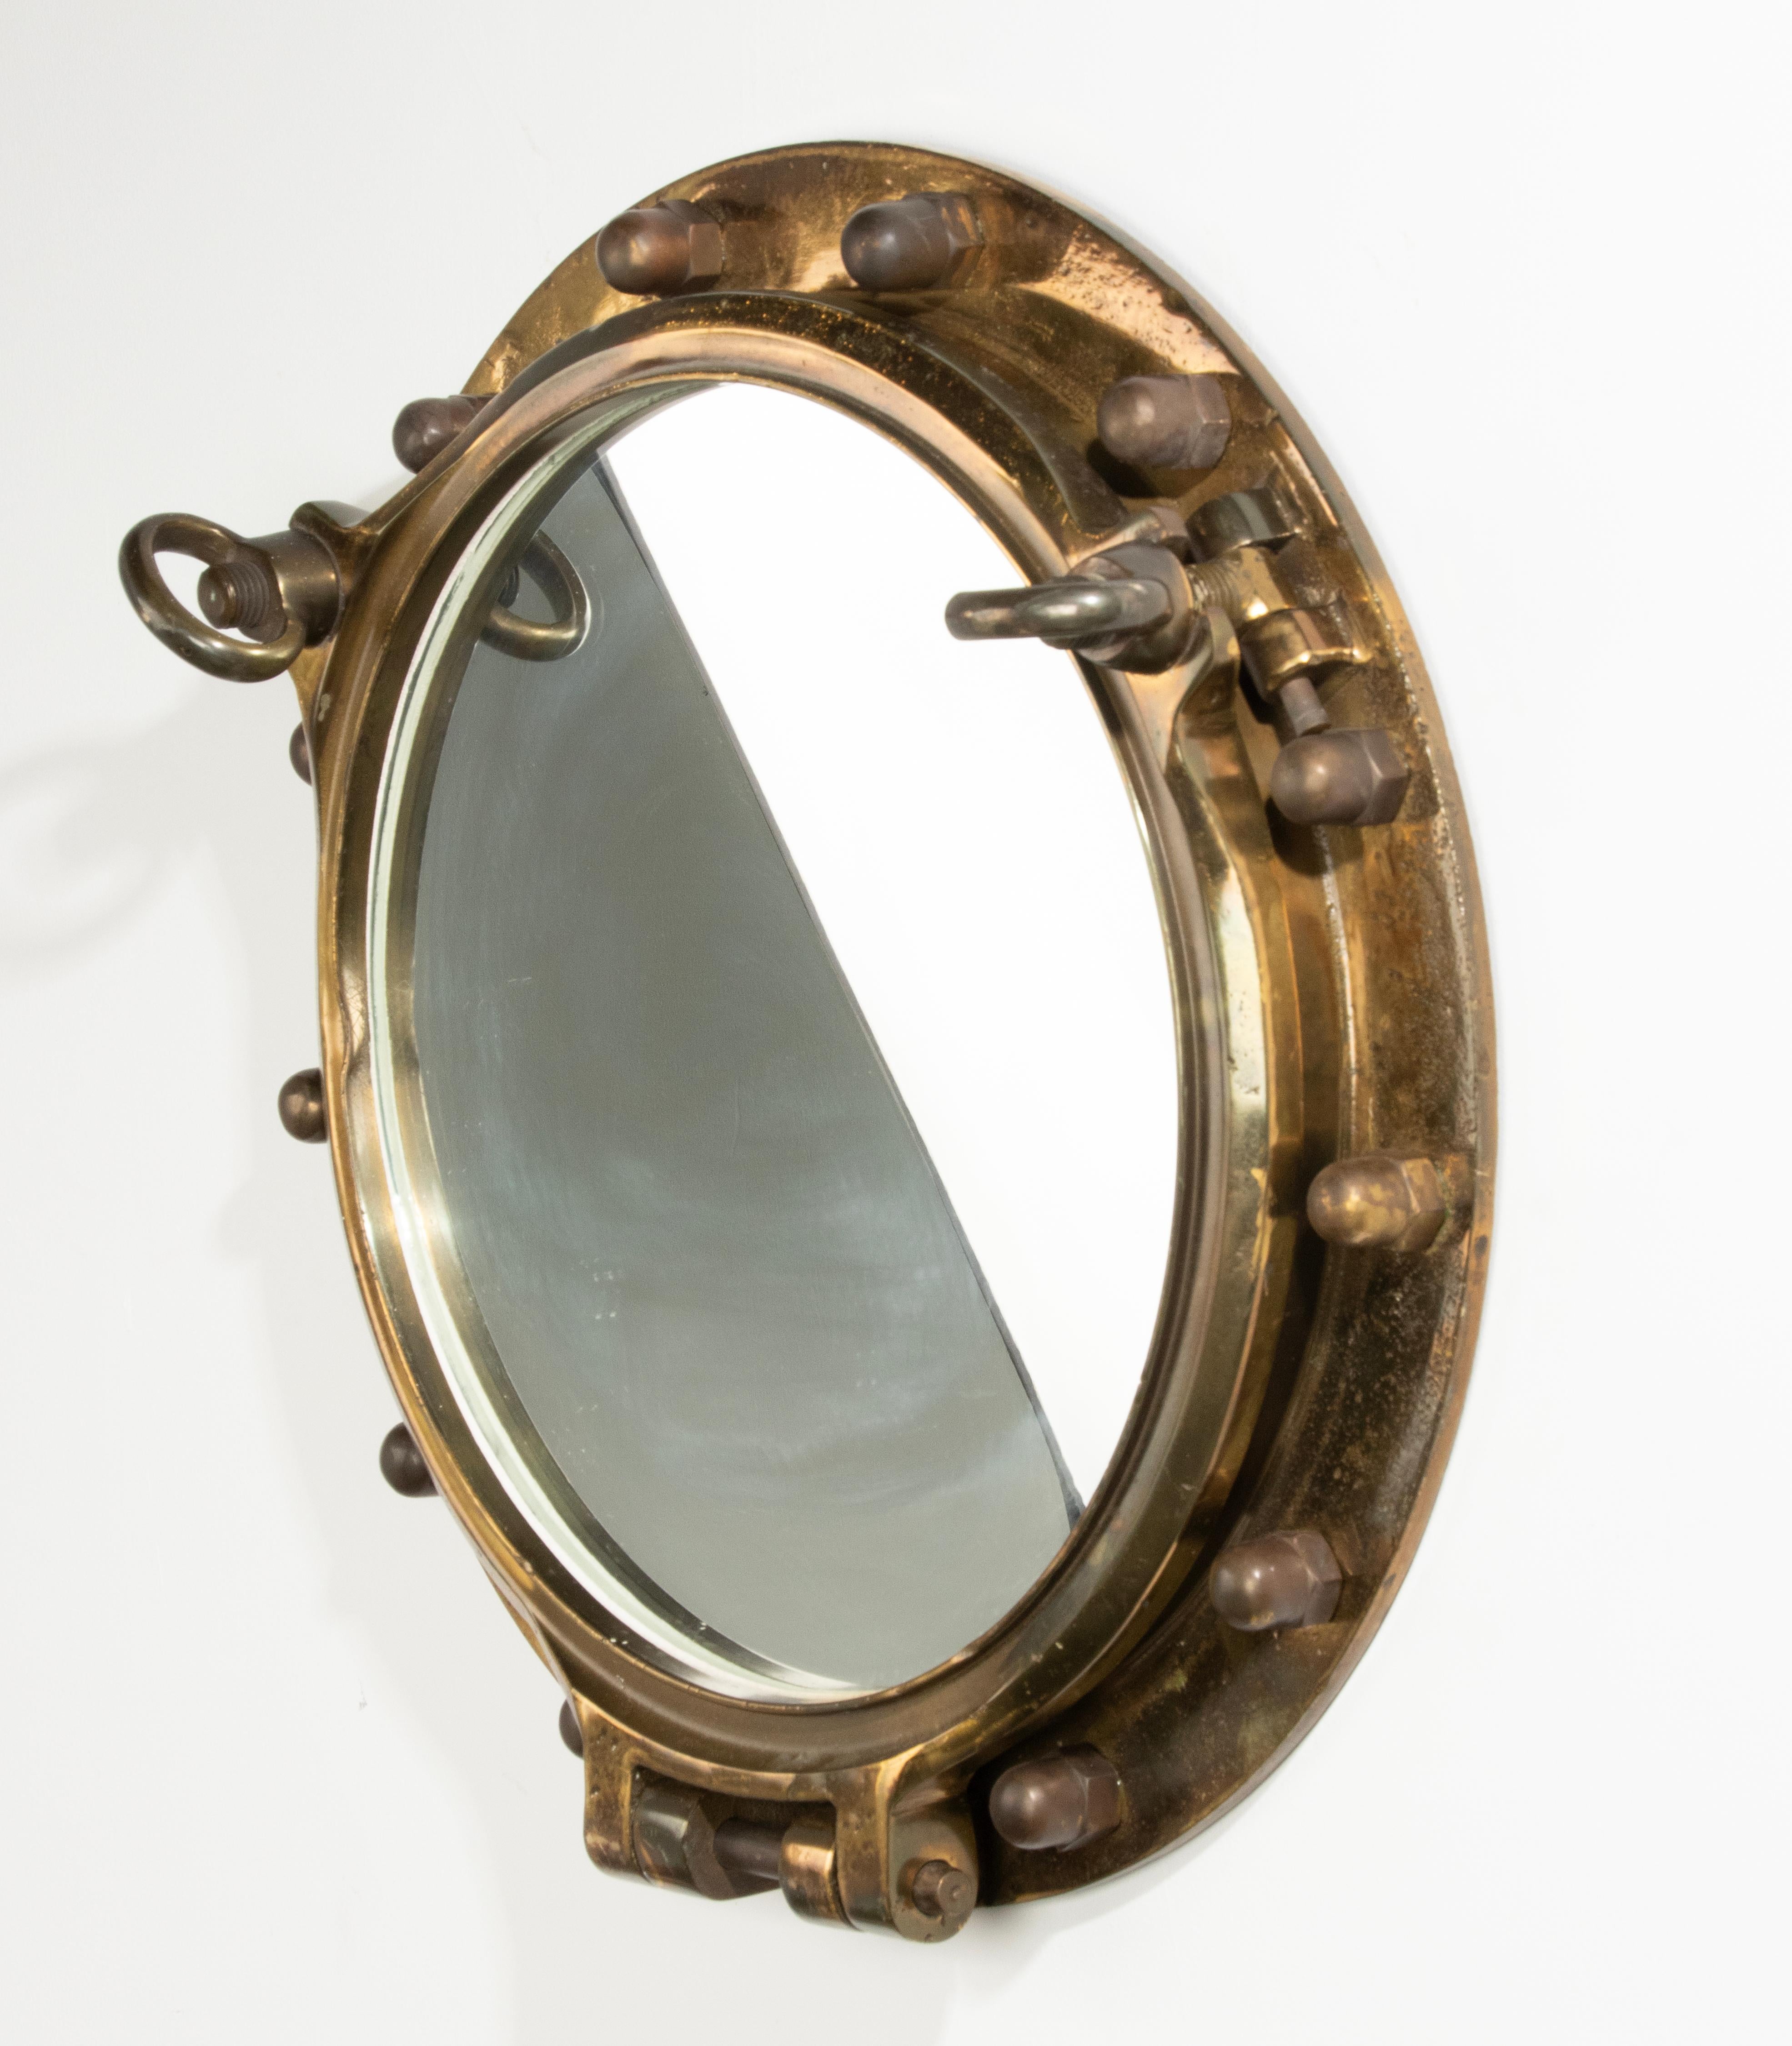 An antique heavy duty and large ship porthole wall mirror made of brass. A mirror glass has been placed inside. The whole has a beautiful old patina. The original glass is removed and replaced by a mirror glass. Some wear and small dents on the